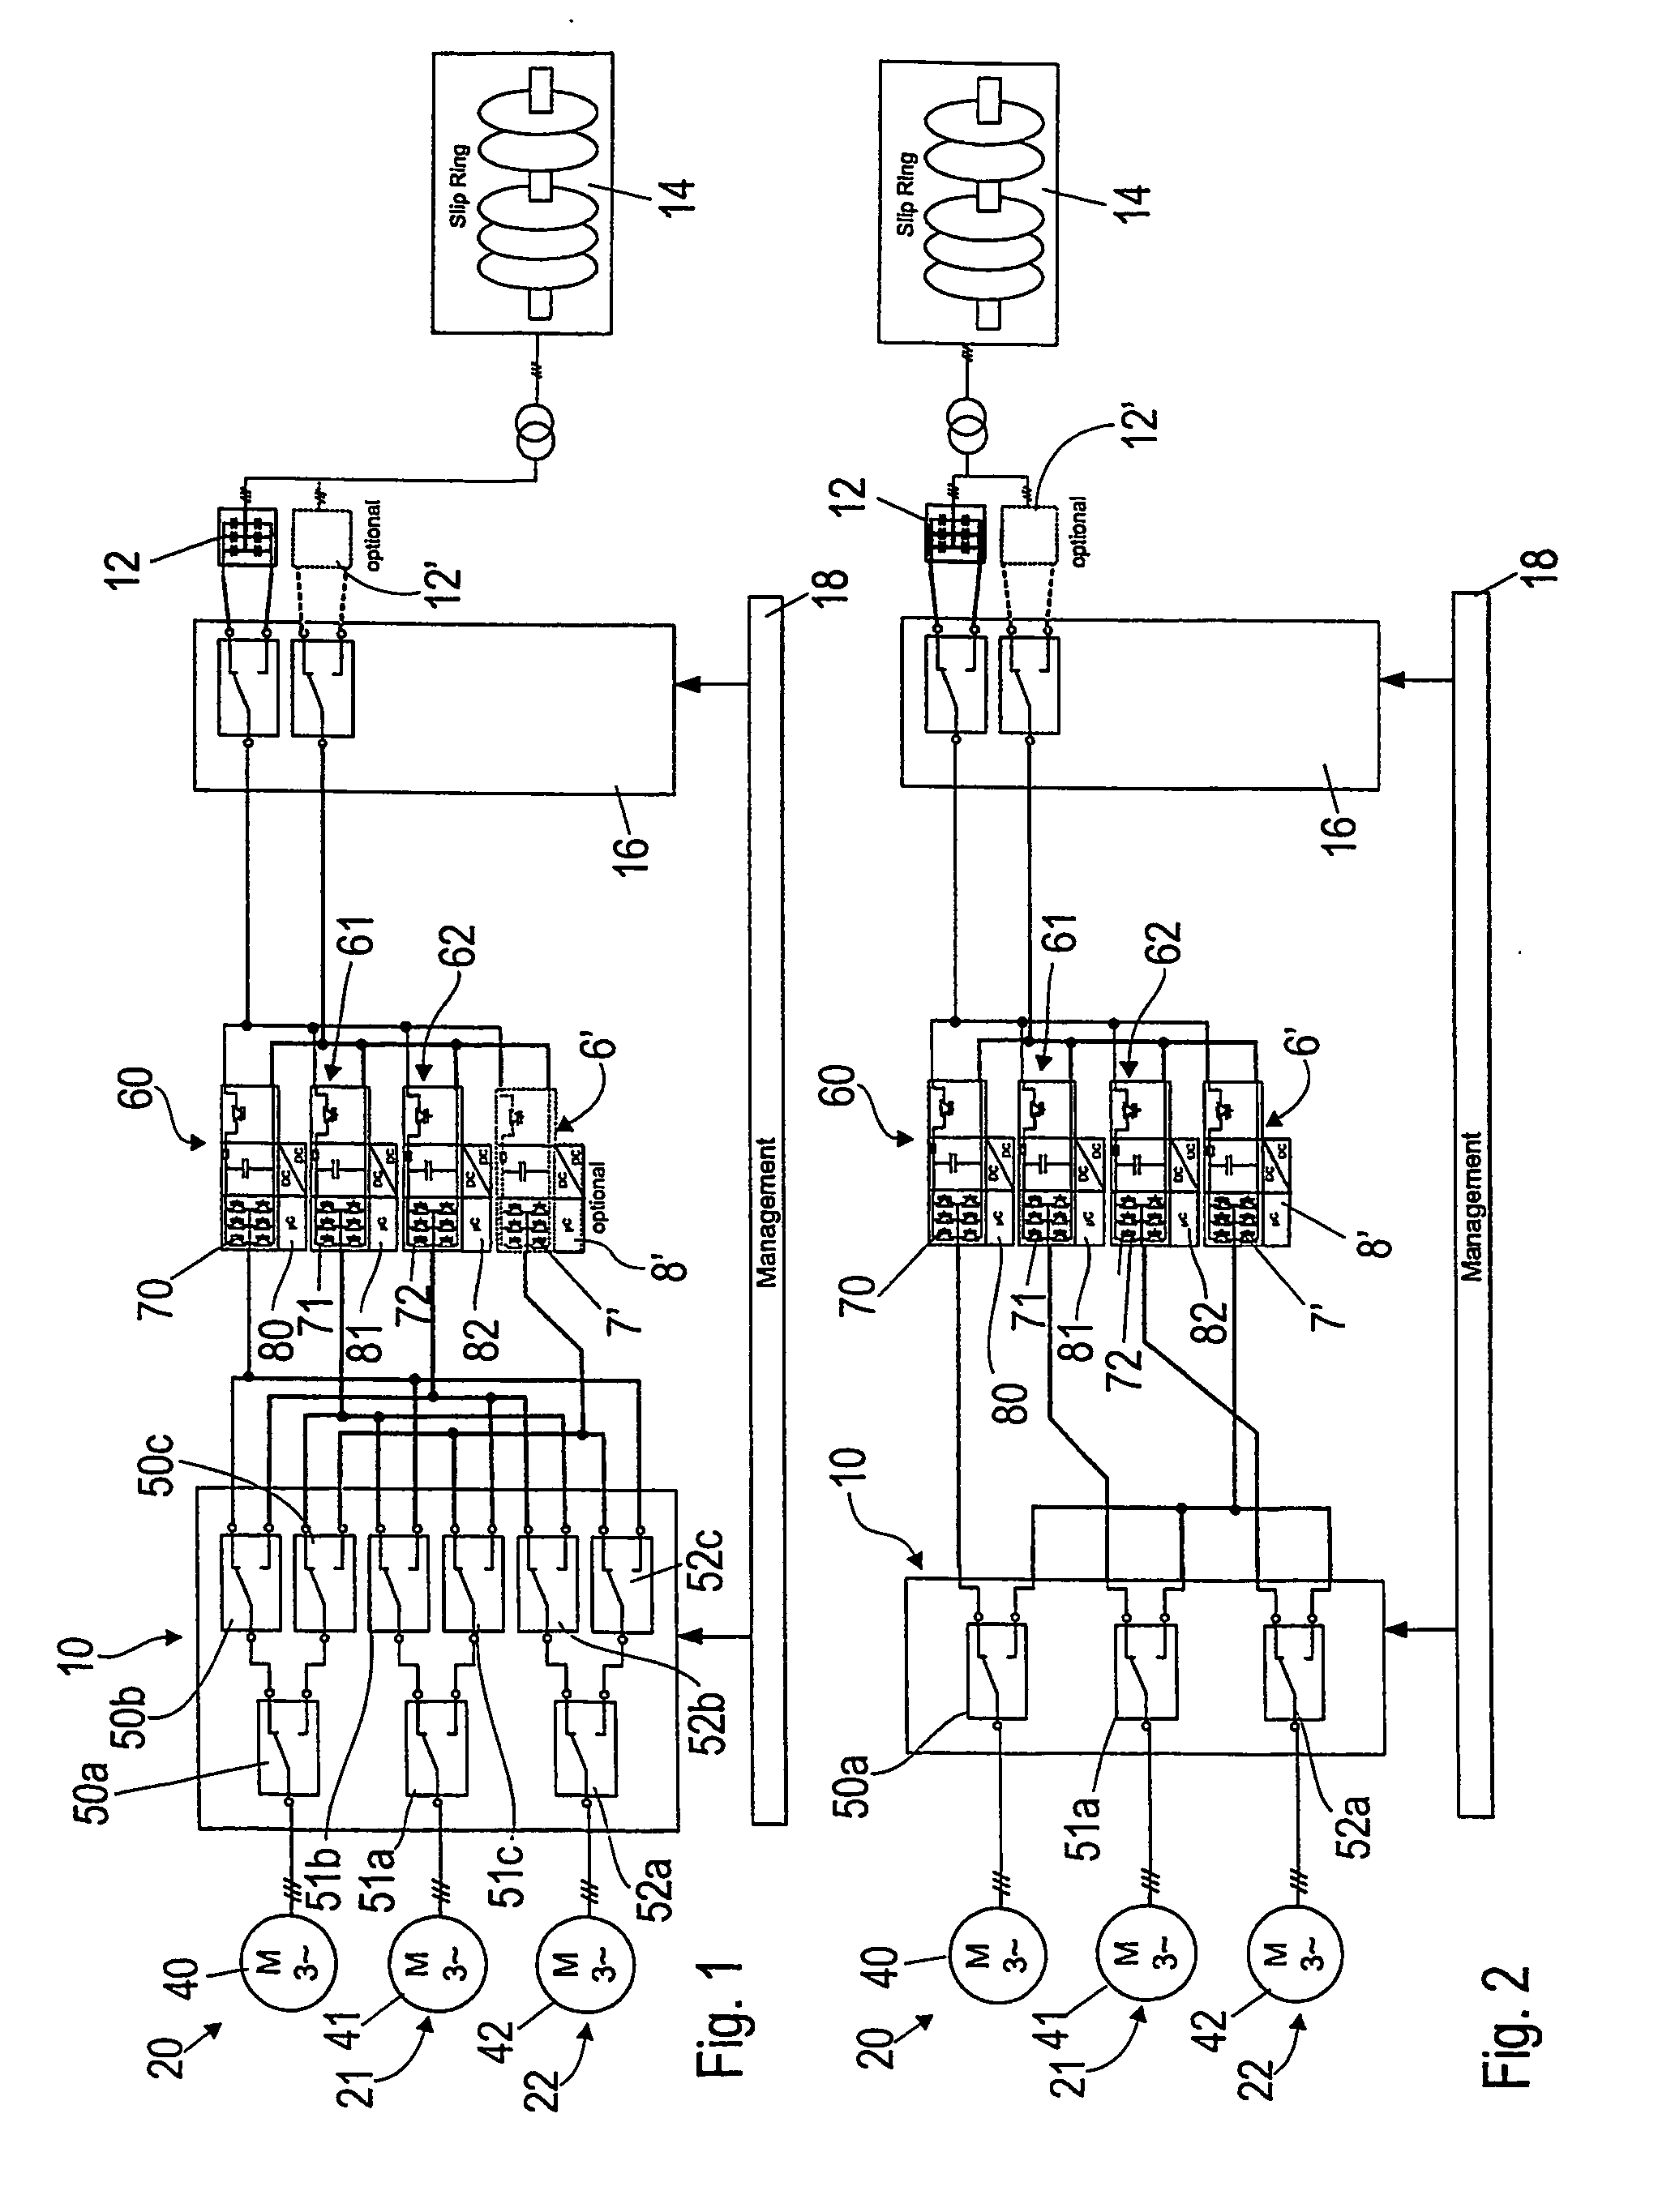 Redundant Blade Pitch Control System for a Wind Turbine and Method for Controlling a Wind Turbine